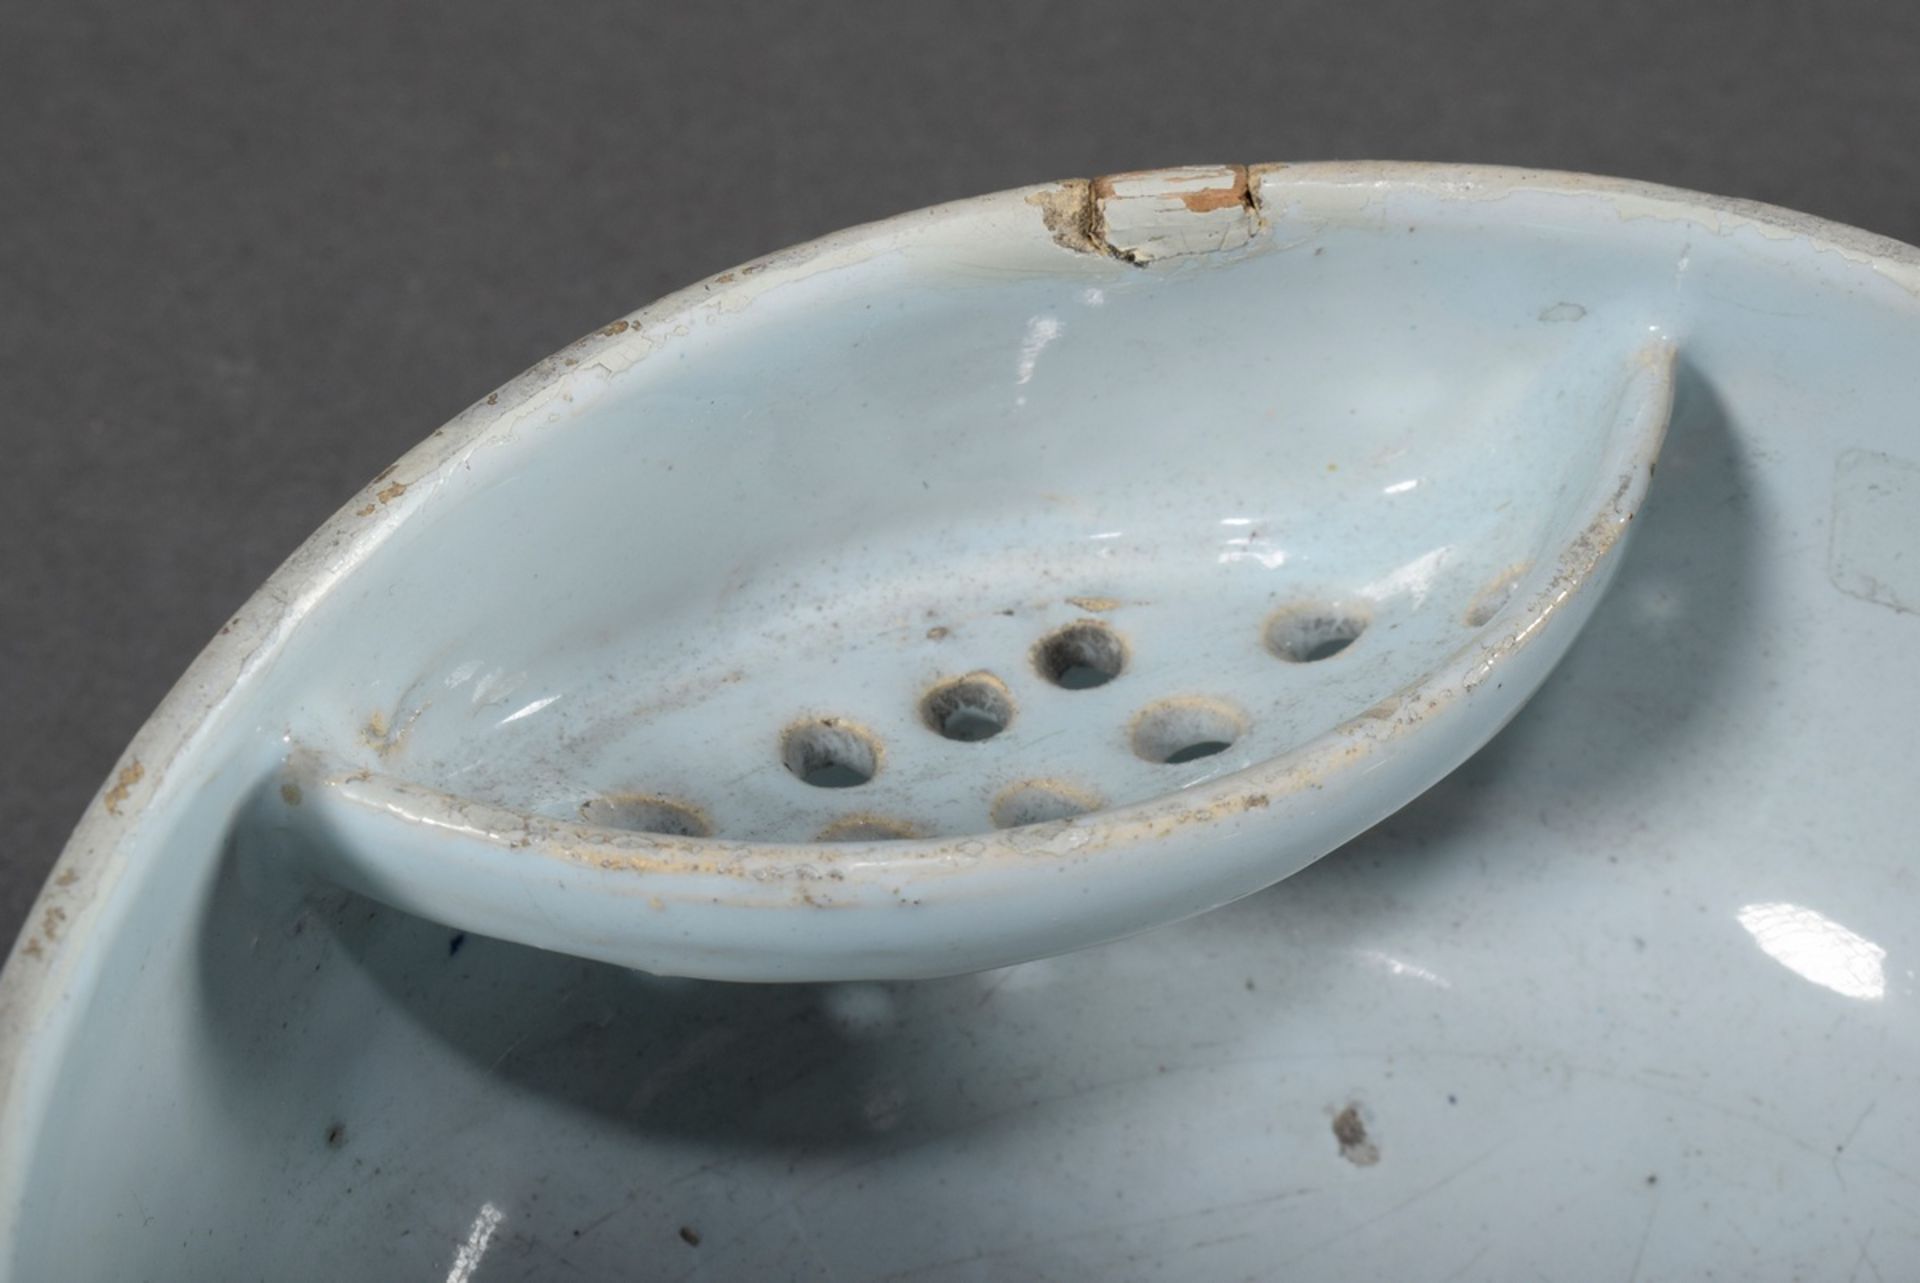 Faience shaving bowl with strainer insert for brush/soap and side handles, fine blue painting decor - Image 5 of 5